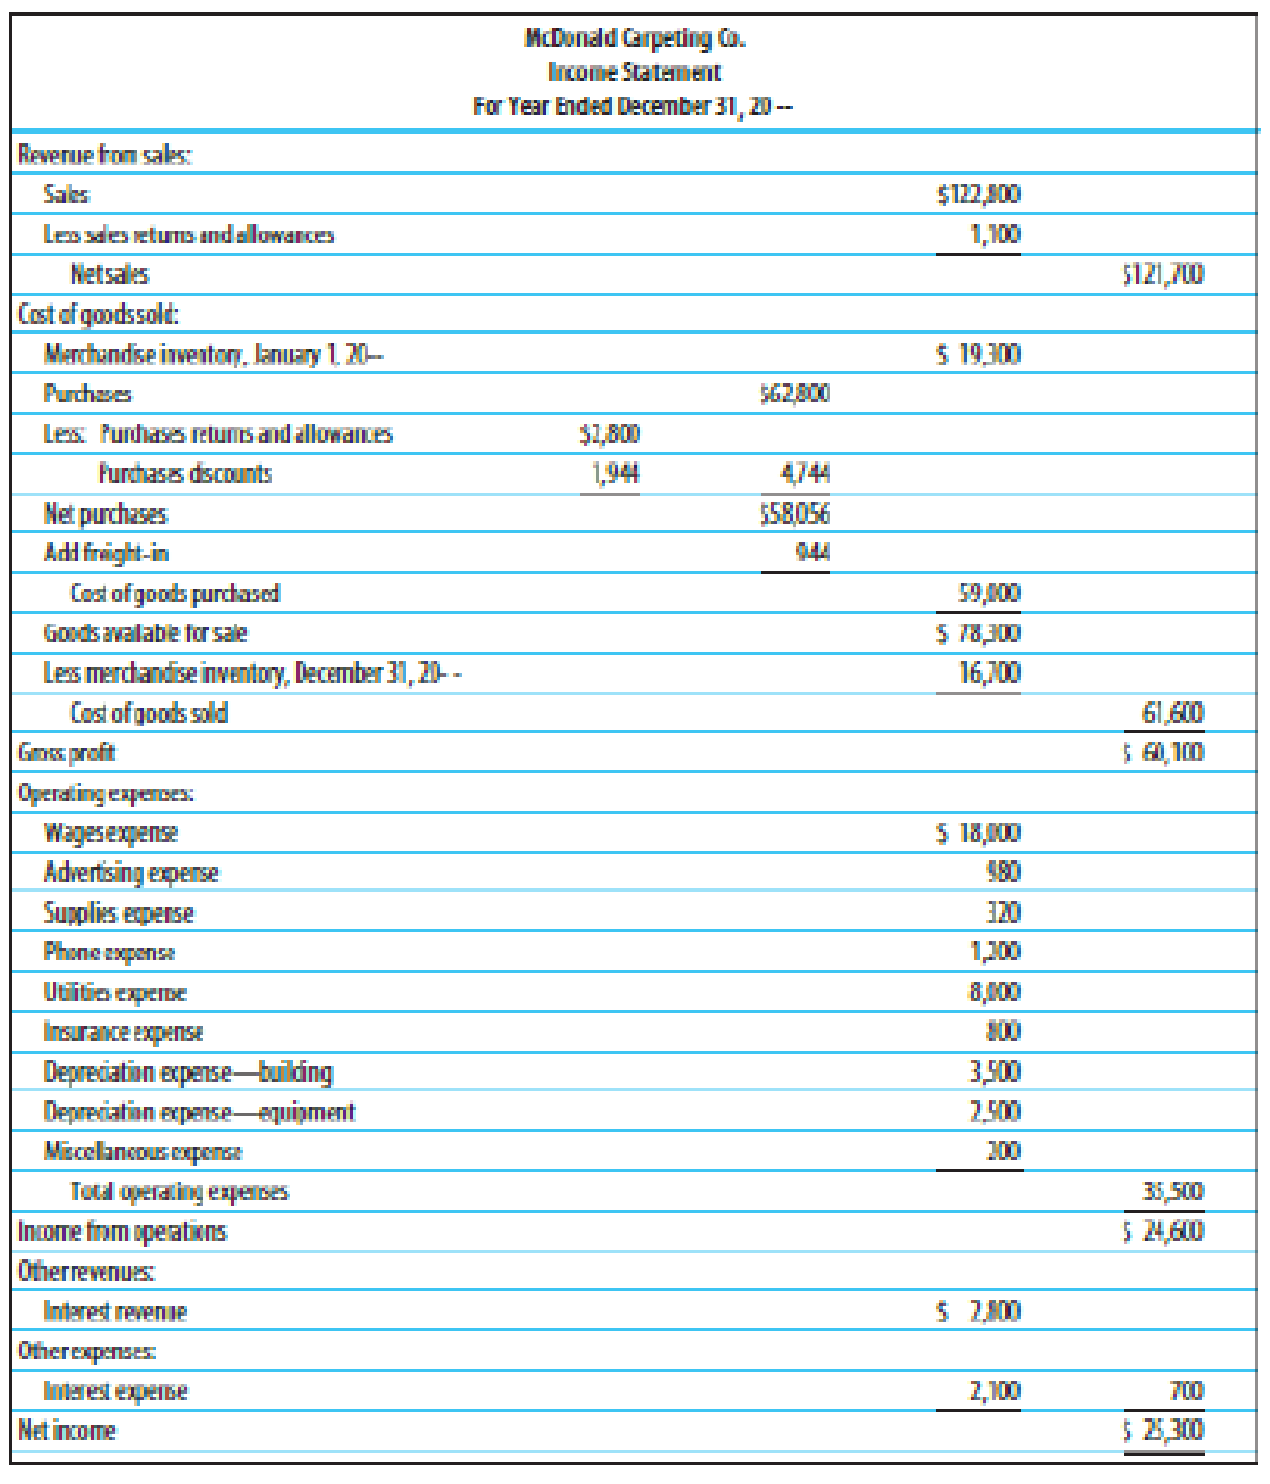 Chapter 15, Problem 4SEB, FINANCIAL RATIOS Based on the financial statements, shown on pages 605606, for McDonald Carpeting 